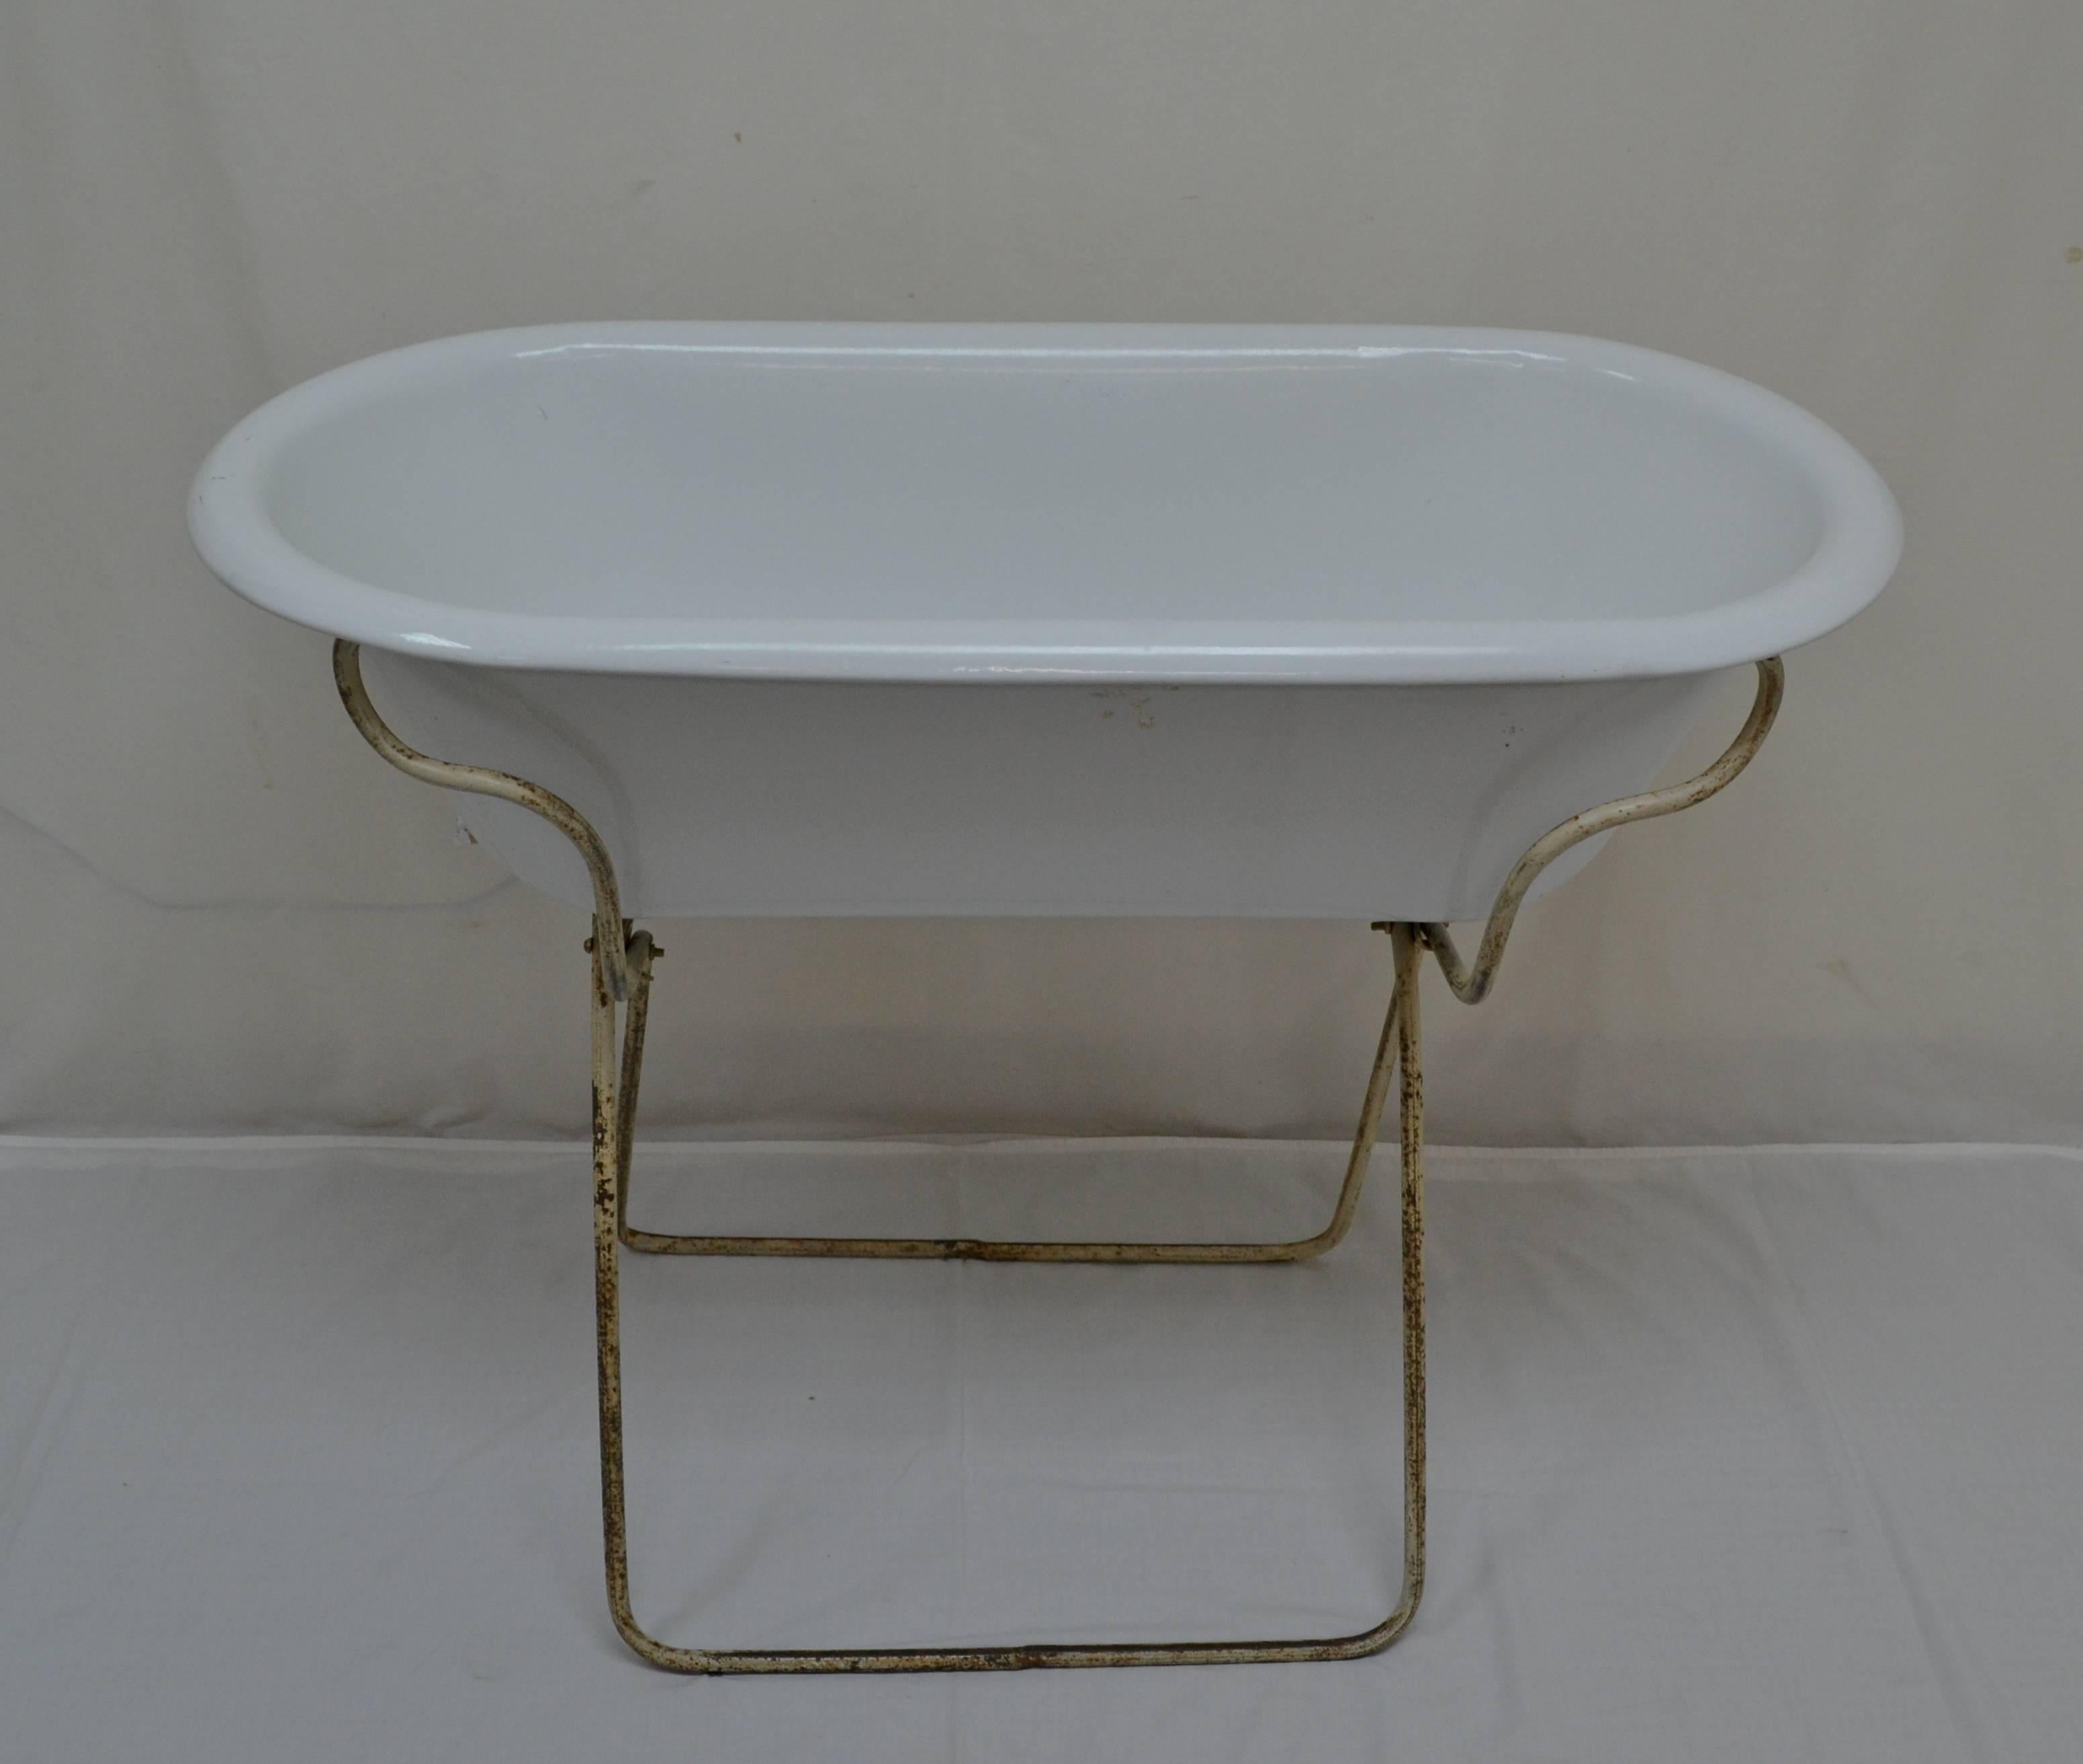 This is a charming, deeper than usual, porcelain enameled baby bath by Lampart of Hungary, mounted on an interesting original folding wrought iron Stand. With summer approaching it would be great filled with bottles of beer or wine on ice, or